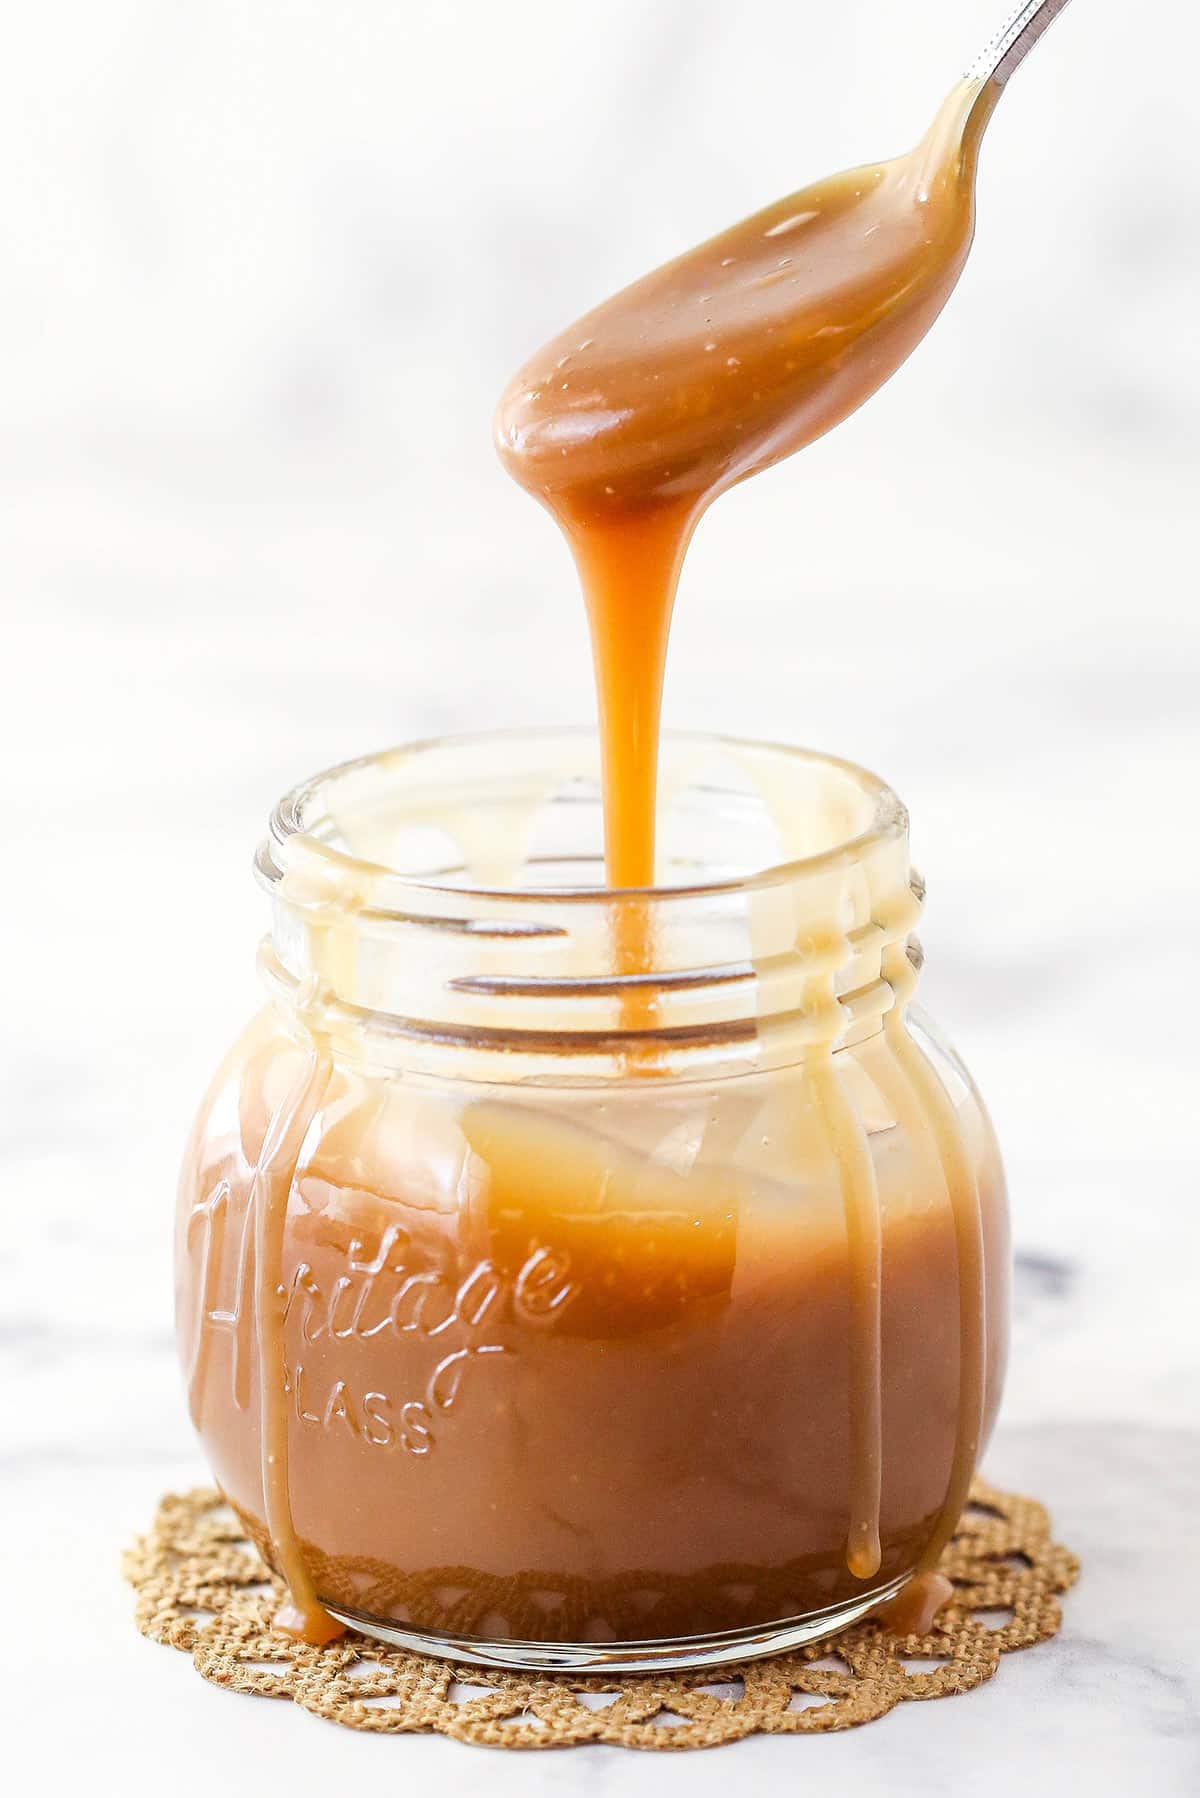 Bourbon Caramel Sauce dripping from a spoon into a jar filled with sauce.